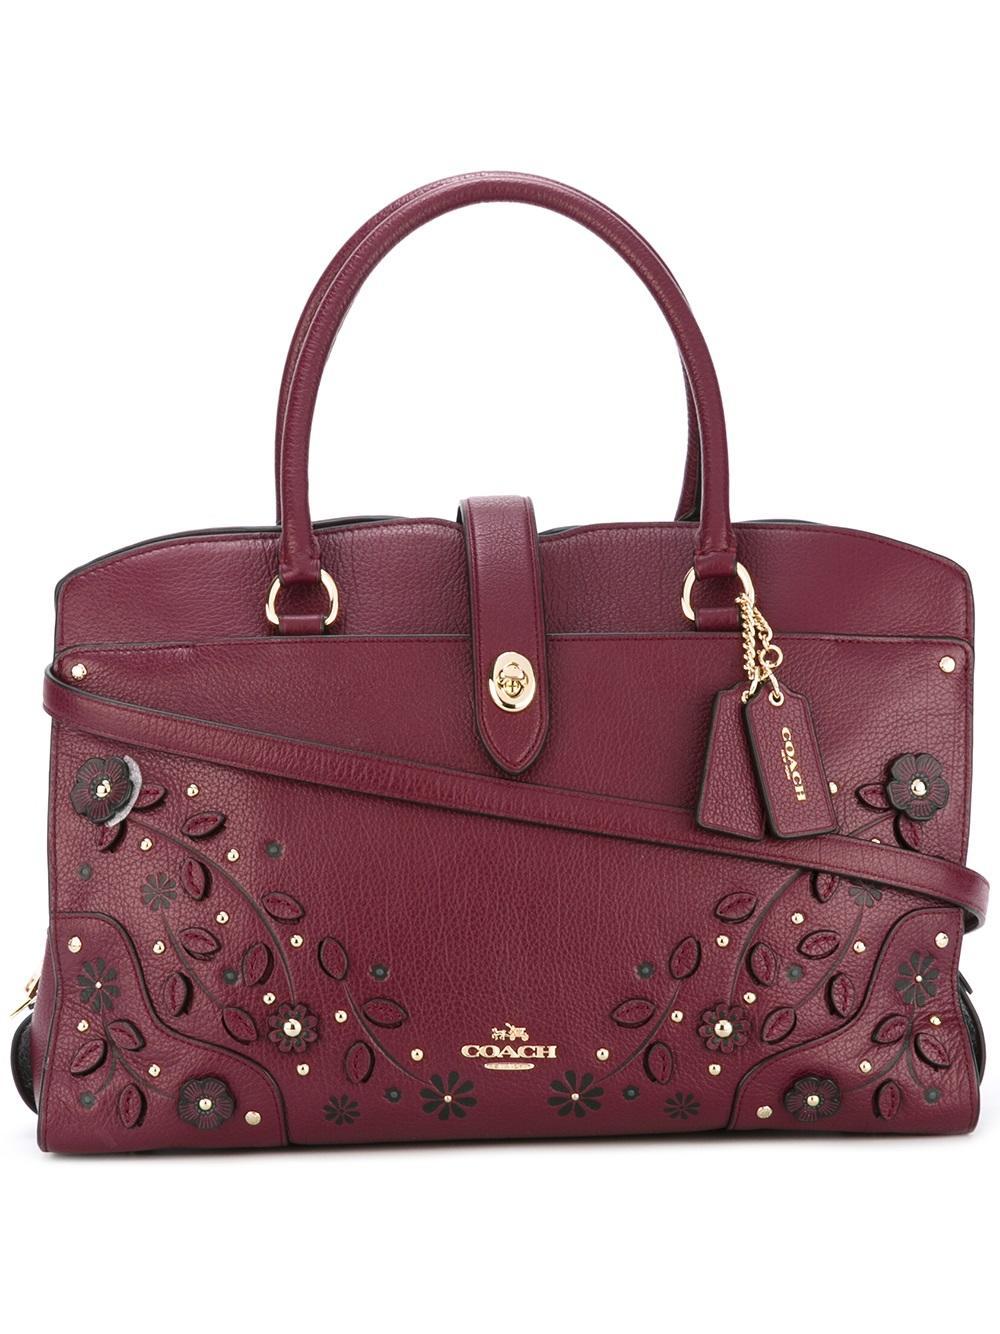 COACH Leather Floral Tote in Red - Lyst